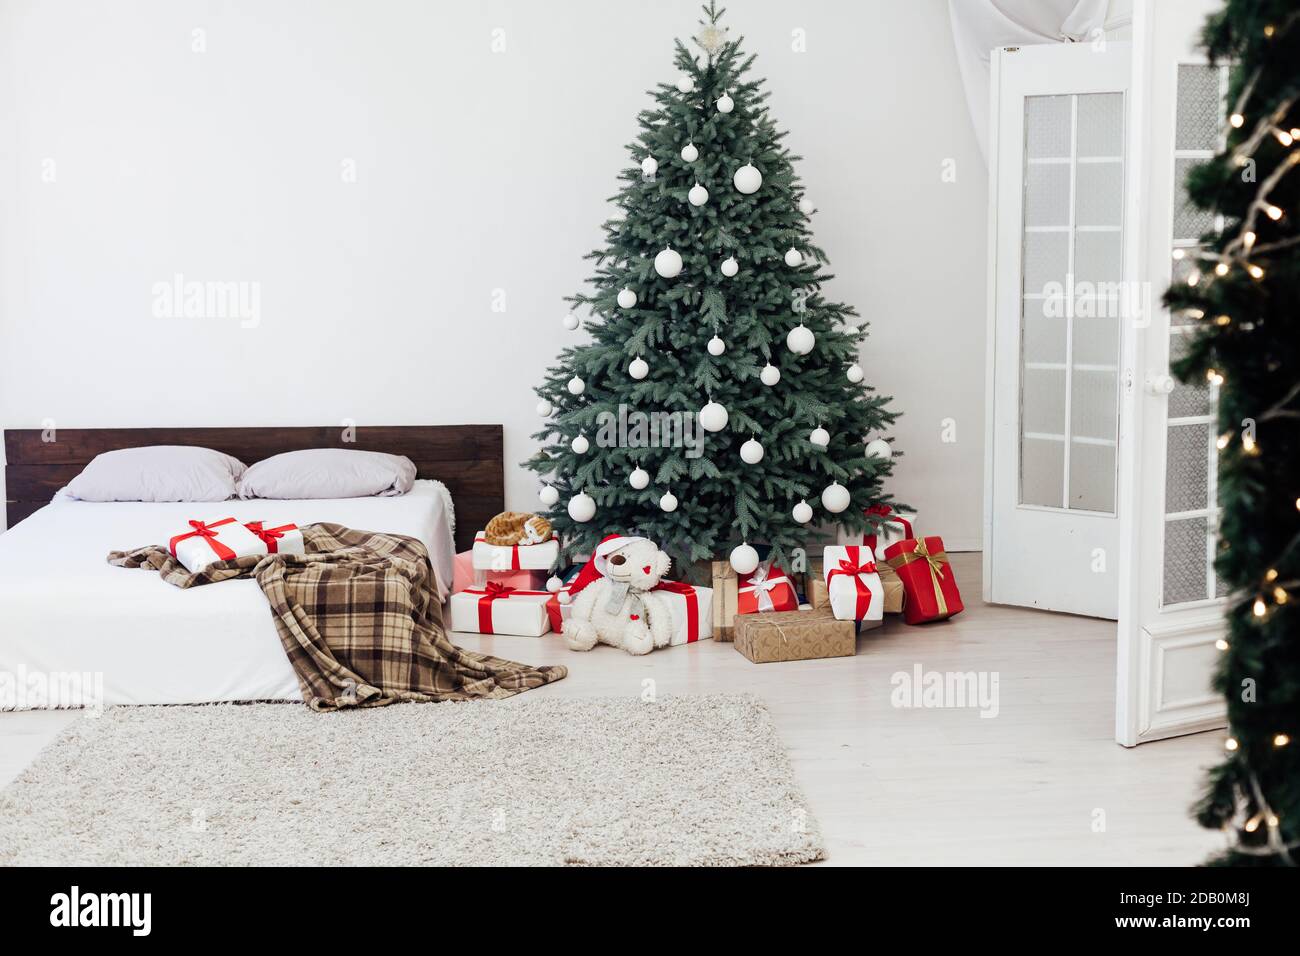 New Year's card bedroom interior with red bed decor and Christmas tree ...